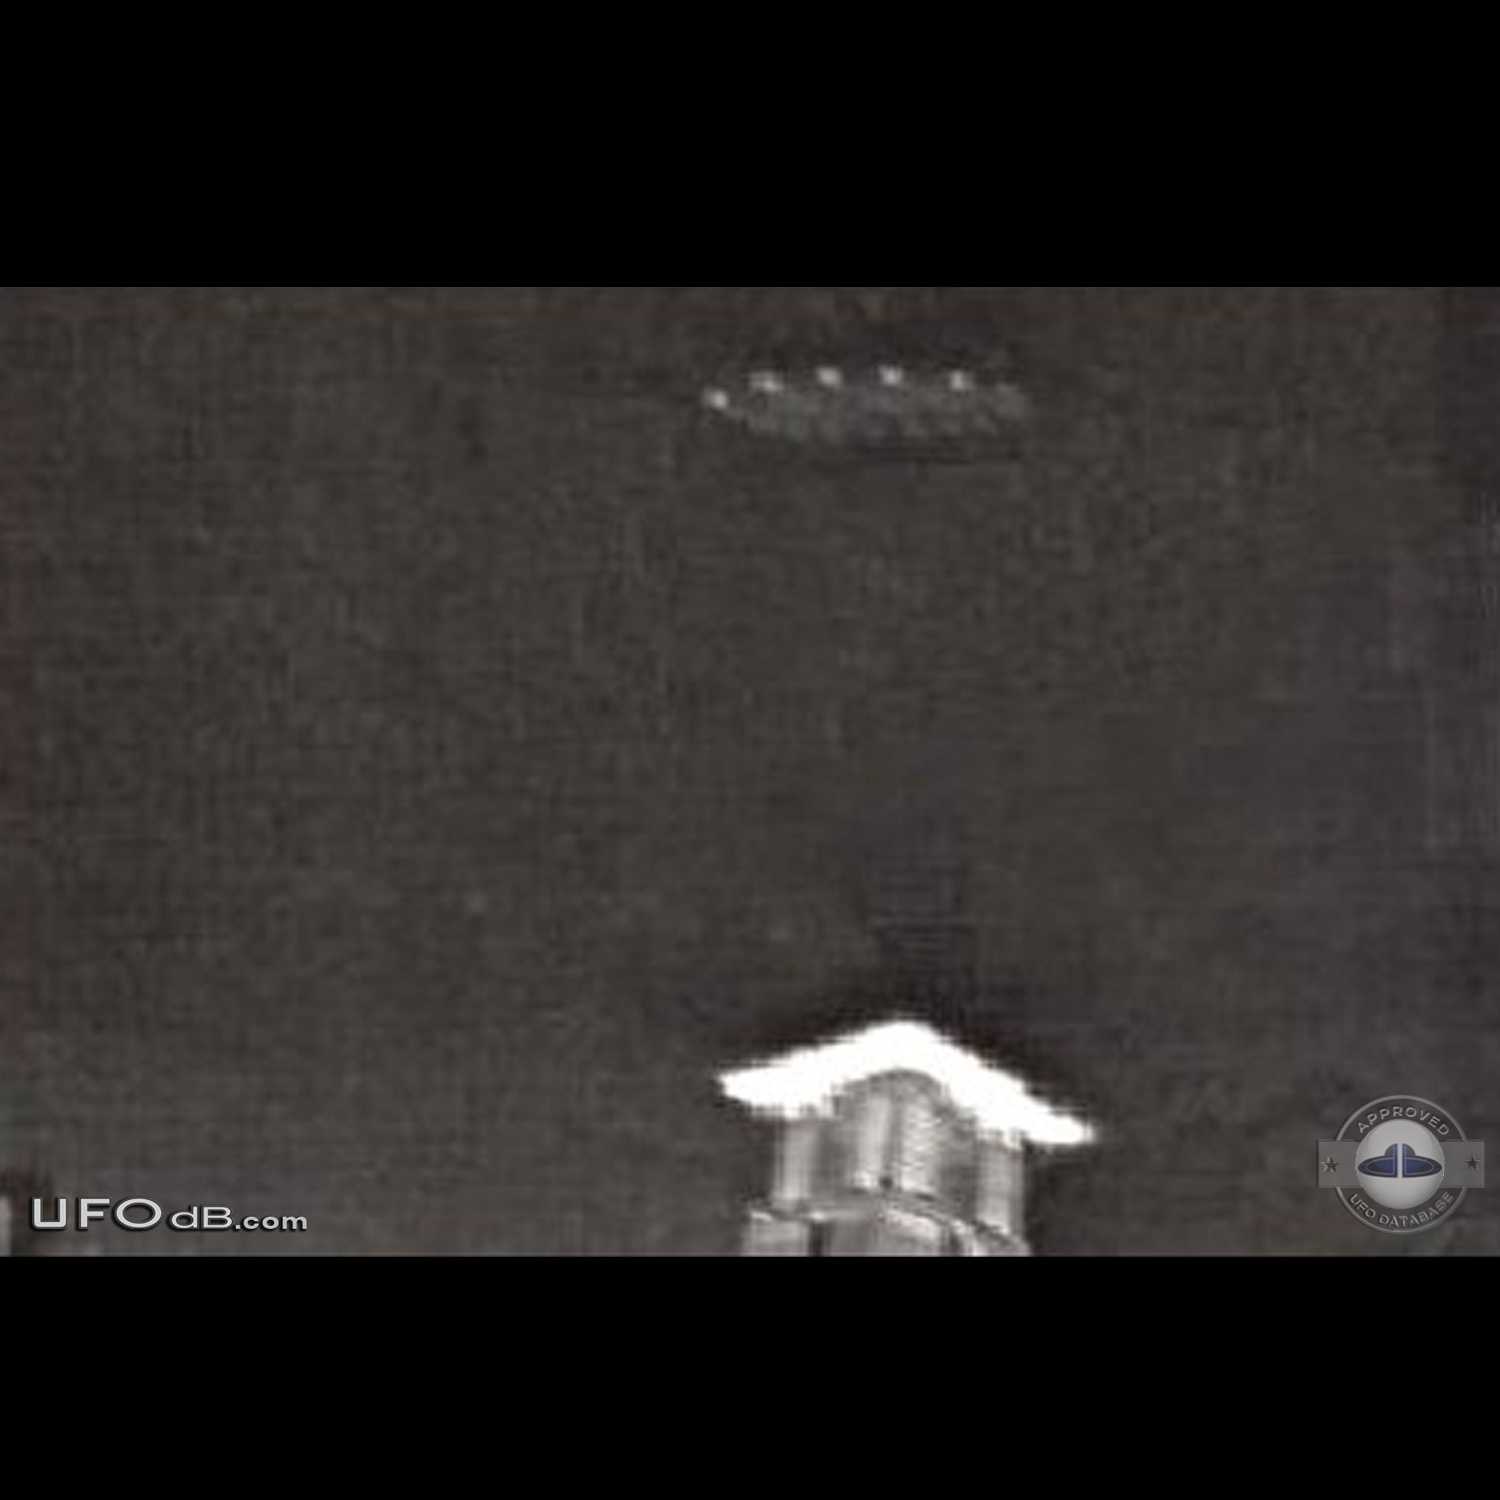 2003 UFO sighting from Dubai caught on picture by a programmer UFO Picture #462-1